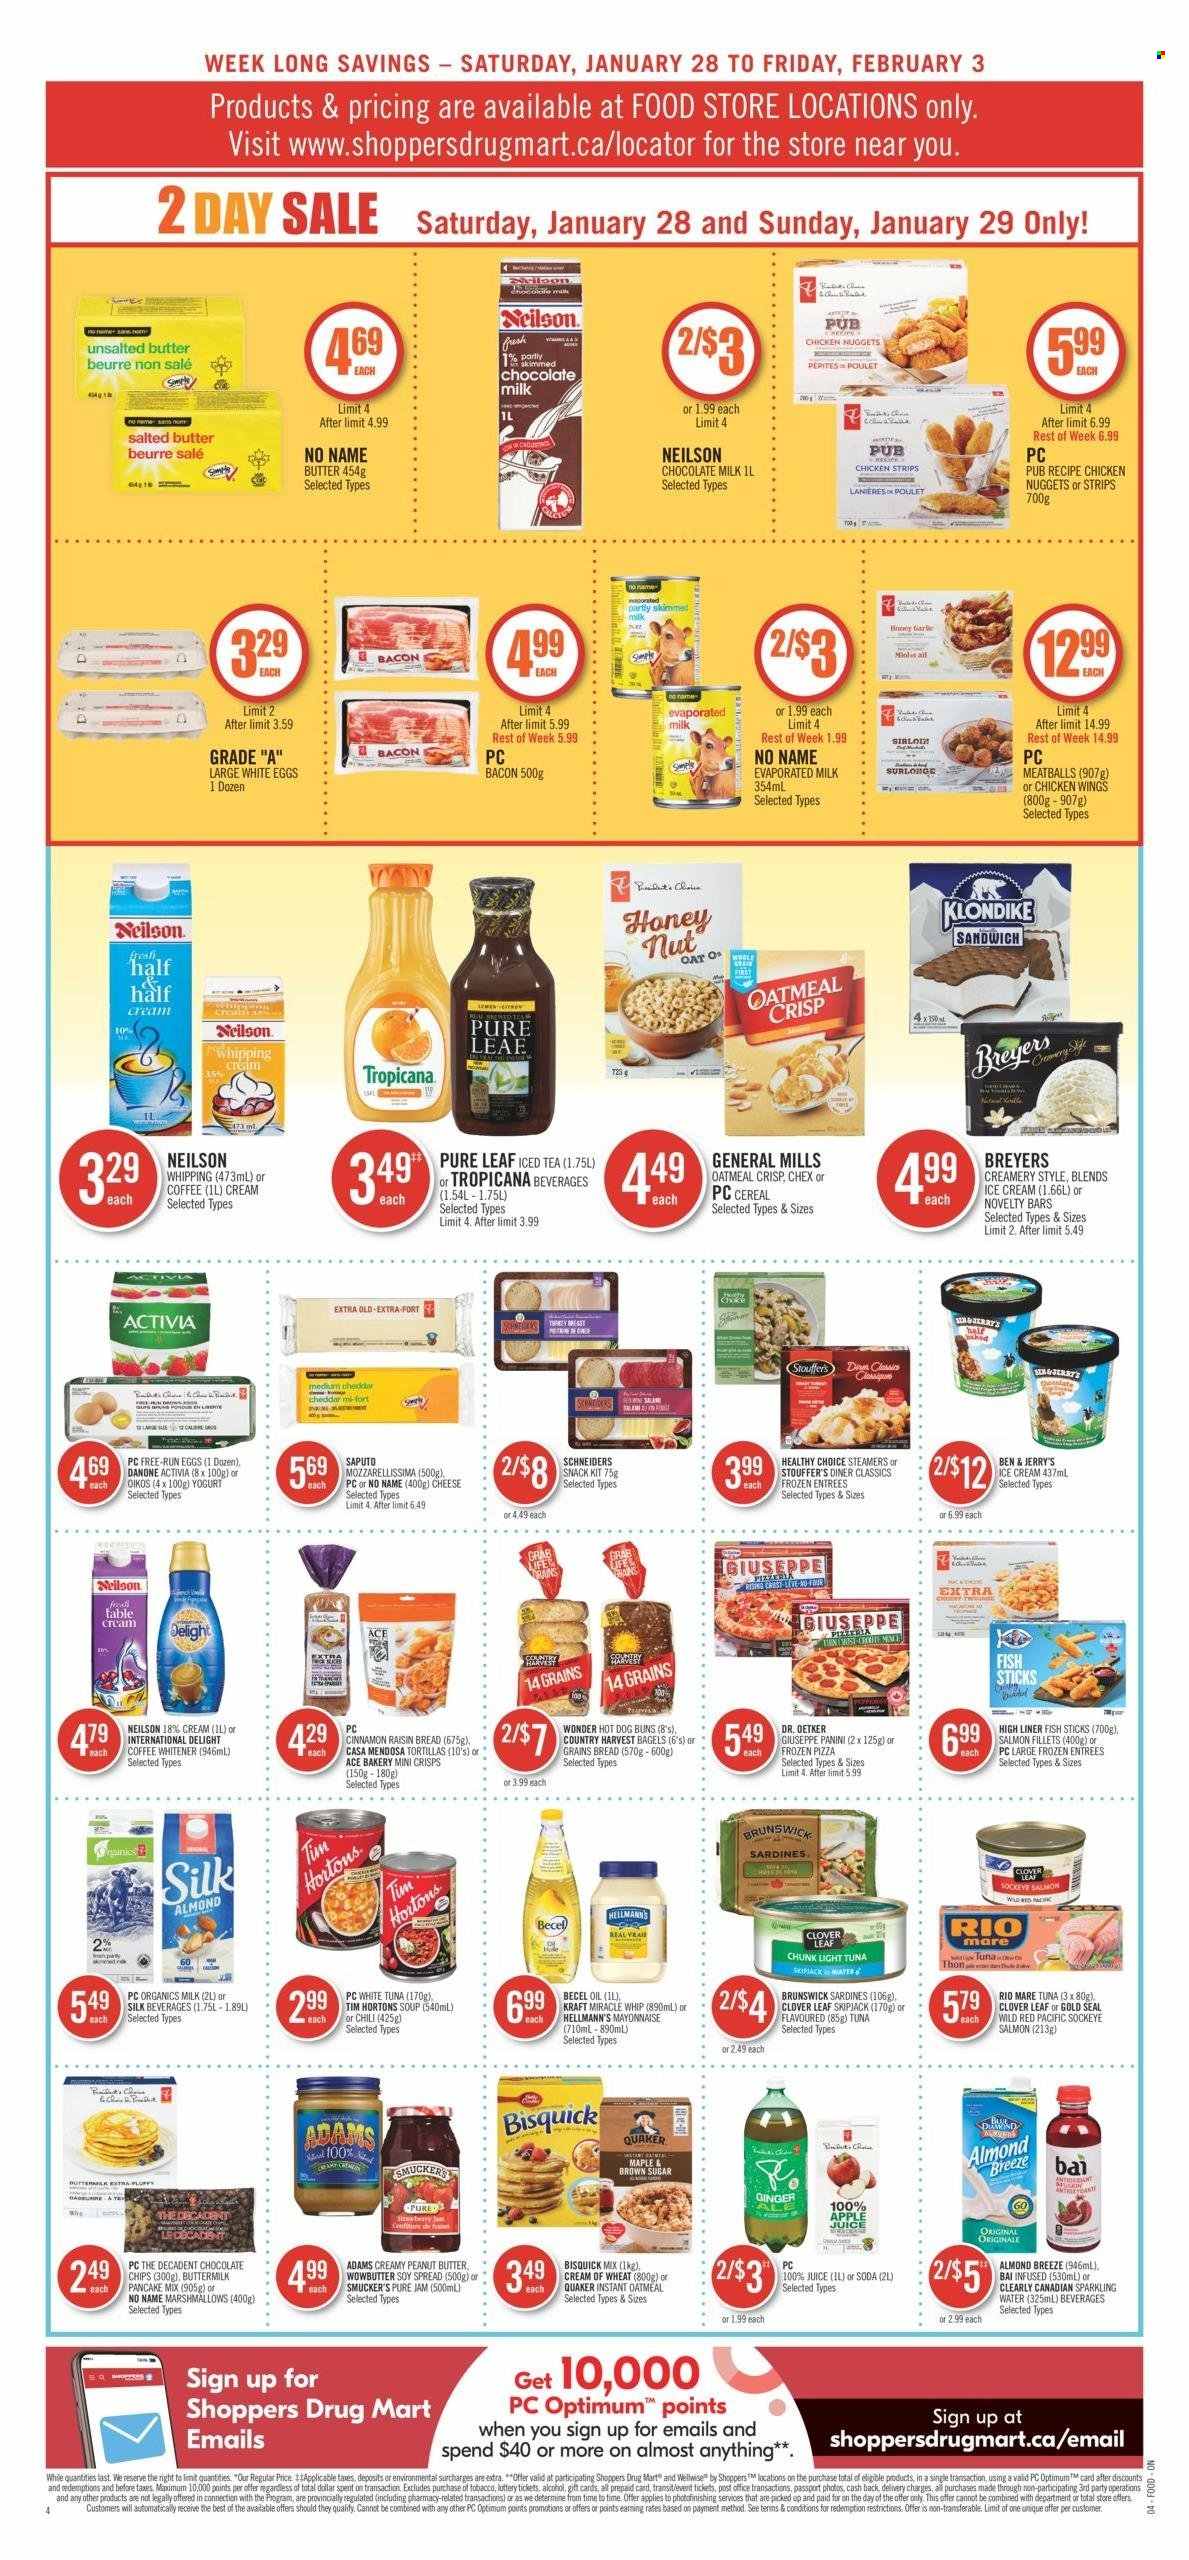 thumbnail - Shoppers Drug Mart Flyer - January 28, 2023 - February 03, 2023 - Sales products - bagels, bread, tortillas, panini, buns, ACE Bakery, salmon, salmon fillet, sardines, tuna, fish, fish fingers, No Name, fish sticks, pizza, meatballs, sandwich, soup, nuggets, pancakes, chicken nuggets, Quaker, Healthy Choice, Kraft®, bacon, Dr. Oetker, yoghurt, Clover, Activia, Oikos, buttermilk, evaporated milk, organic milk, Almond Breeze, eggs, salted butter, whipping cream, mayonnaise, Miracle Whip, Hellmann’s, ice cream, Ben & Jerry's, Stouffer's, marshmallows, milk chocolate, snack, Bisquick, oatmeal, oats, light tuna, cereals, Cream of Wheat, ginger, oil, fruit jam, peanut butter, apple juice, juice, ice tea, Bai, soda, sparkling water, Pure Leaf, Optimum, alcohol, Danone. Page 5.